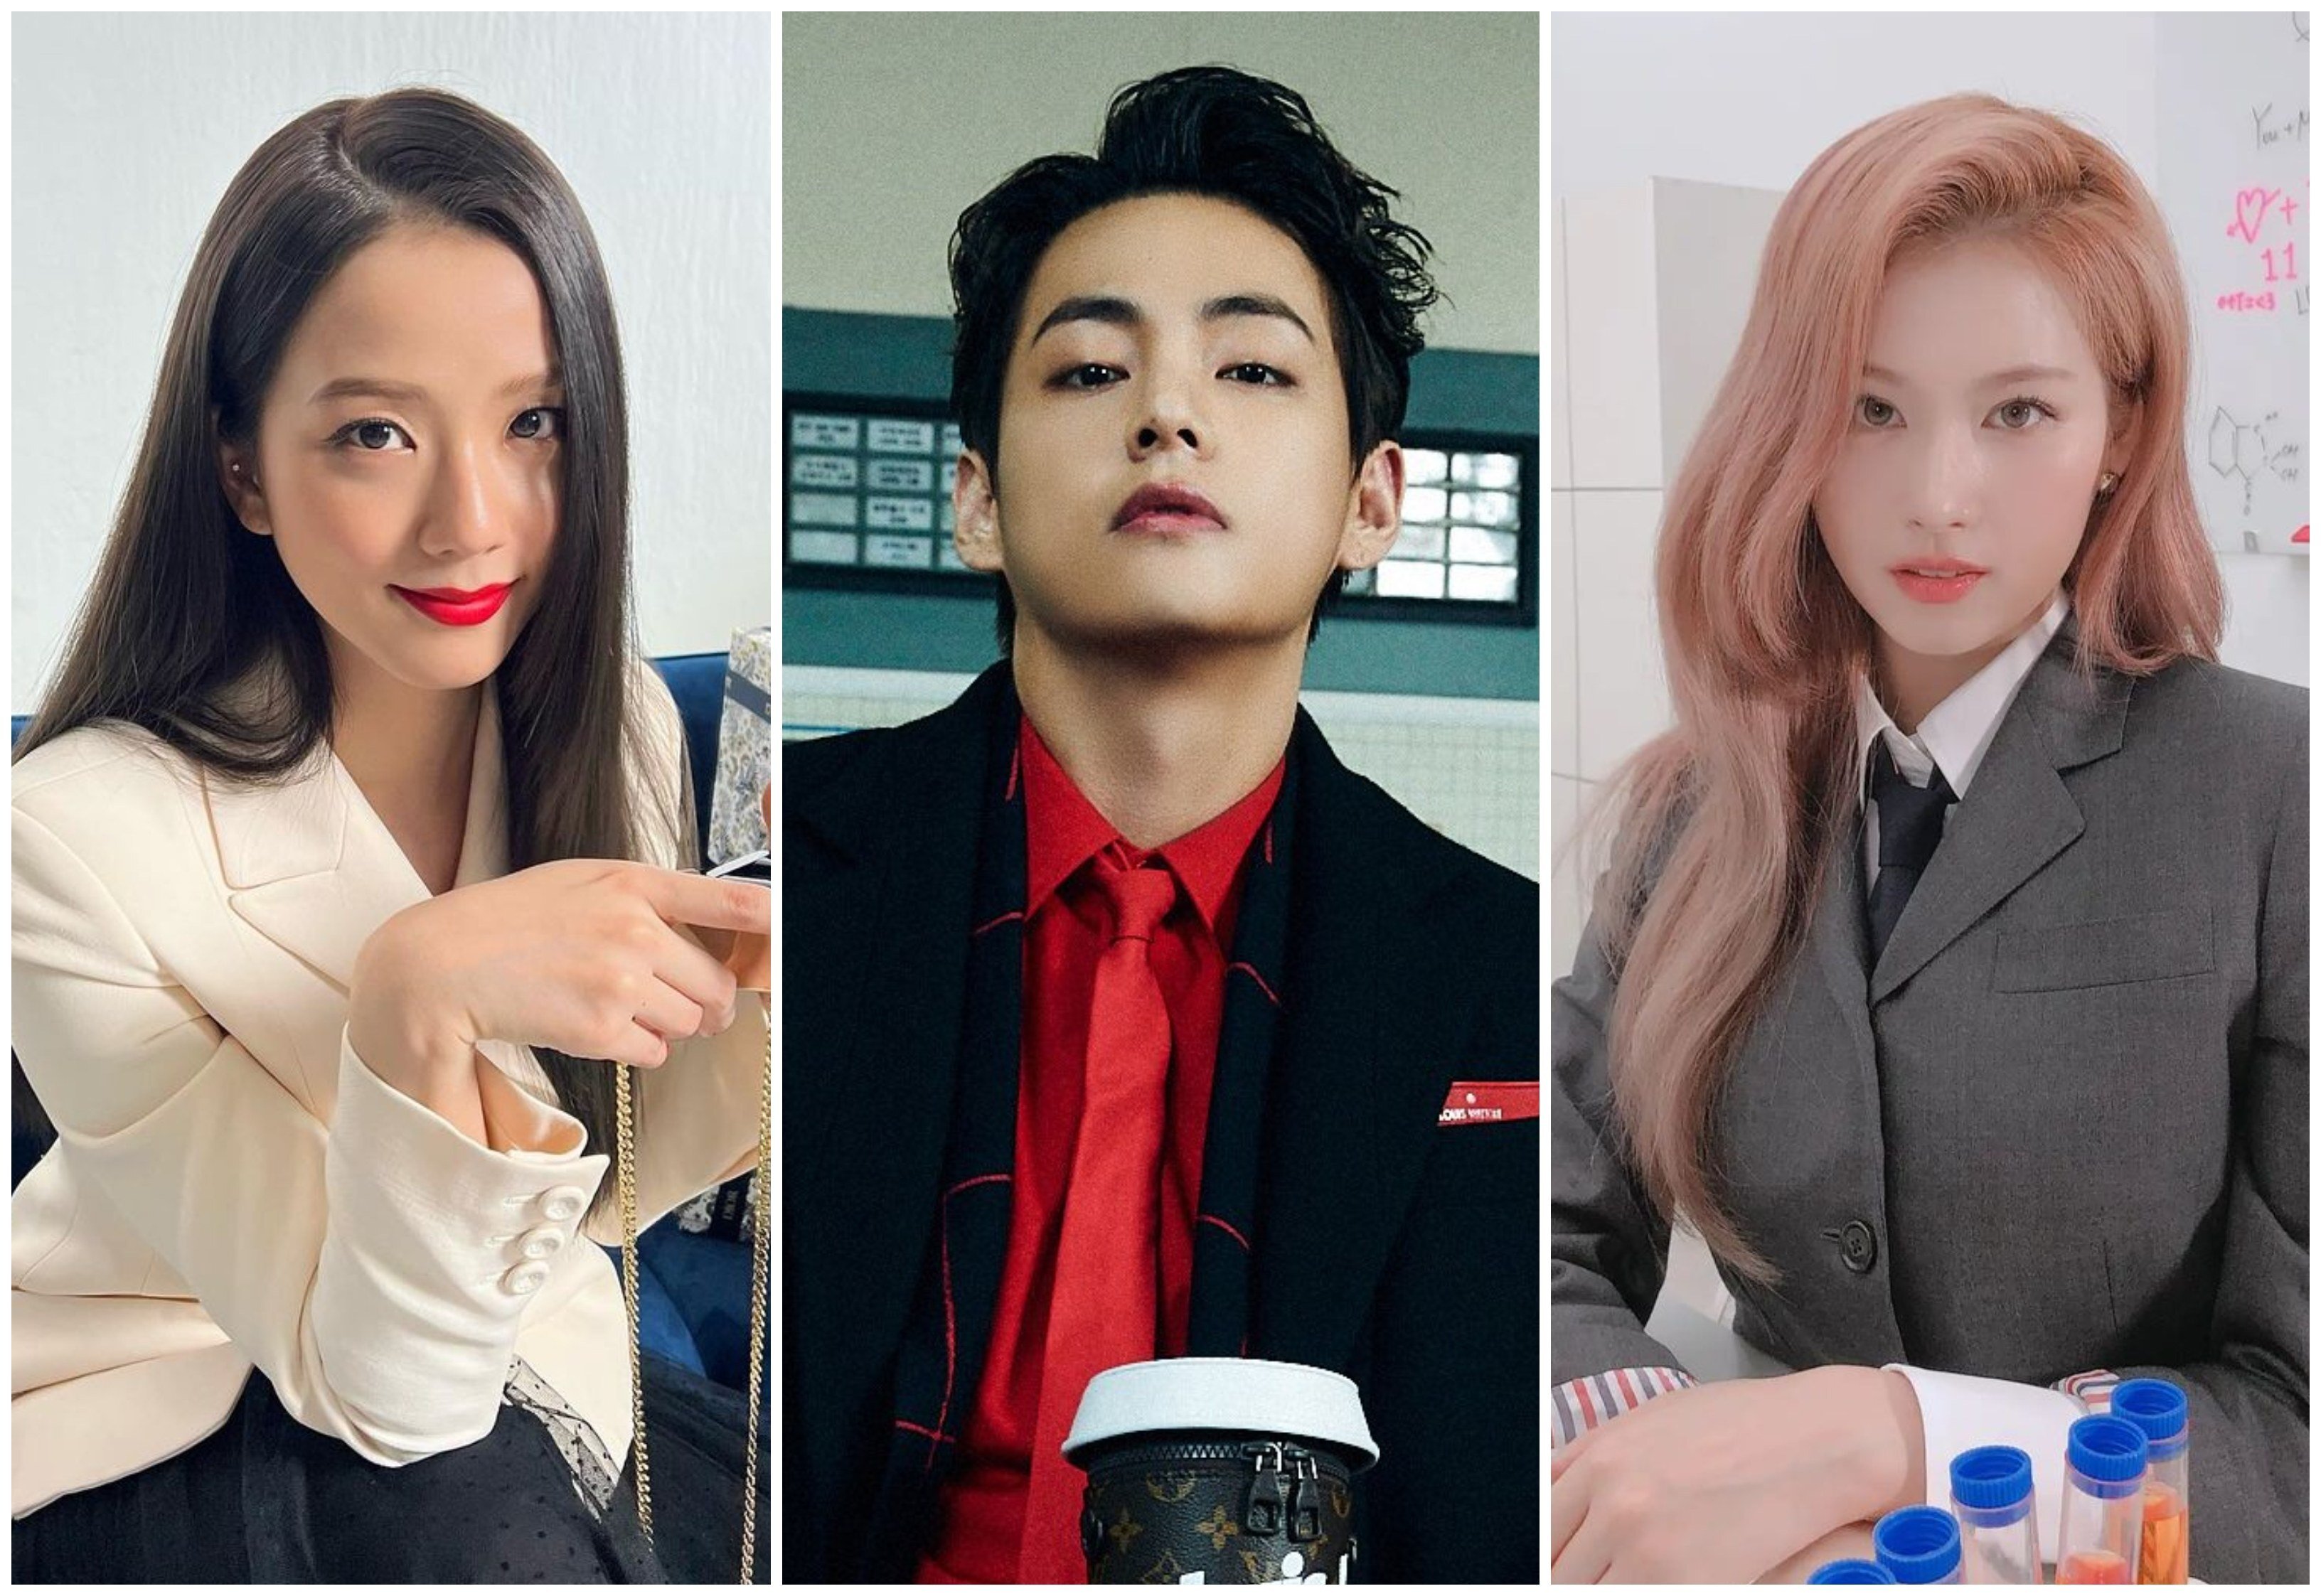 K Pop S Shocking Instagram Backlash 8 Idols Who Got Flack For Their Photos From Bts V And Blackpink S Jennie And Jisoo To Twice S Sana And Exo S Xiumin South China Morning Post